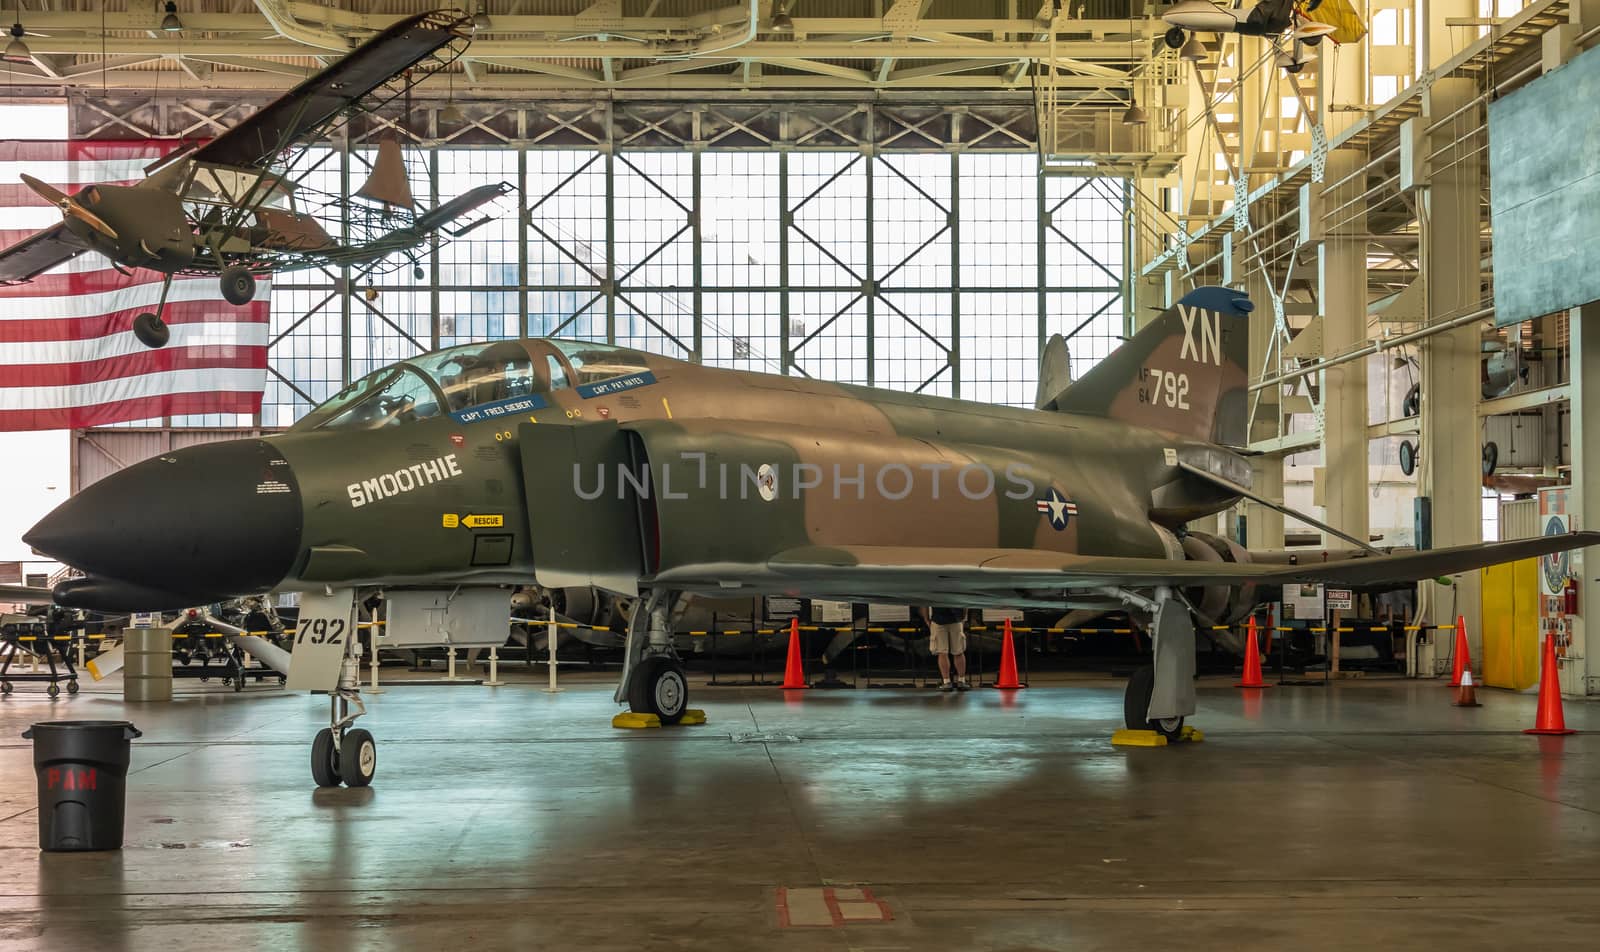 XN 792 fighter jet Smoothie in hangar of Pearl Harbor Aviation M by Claudine